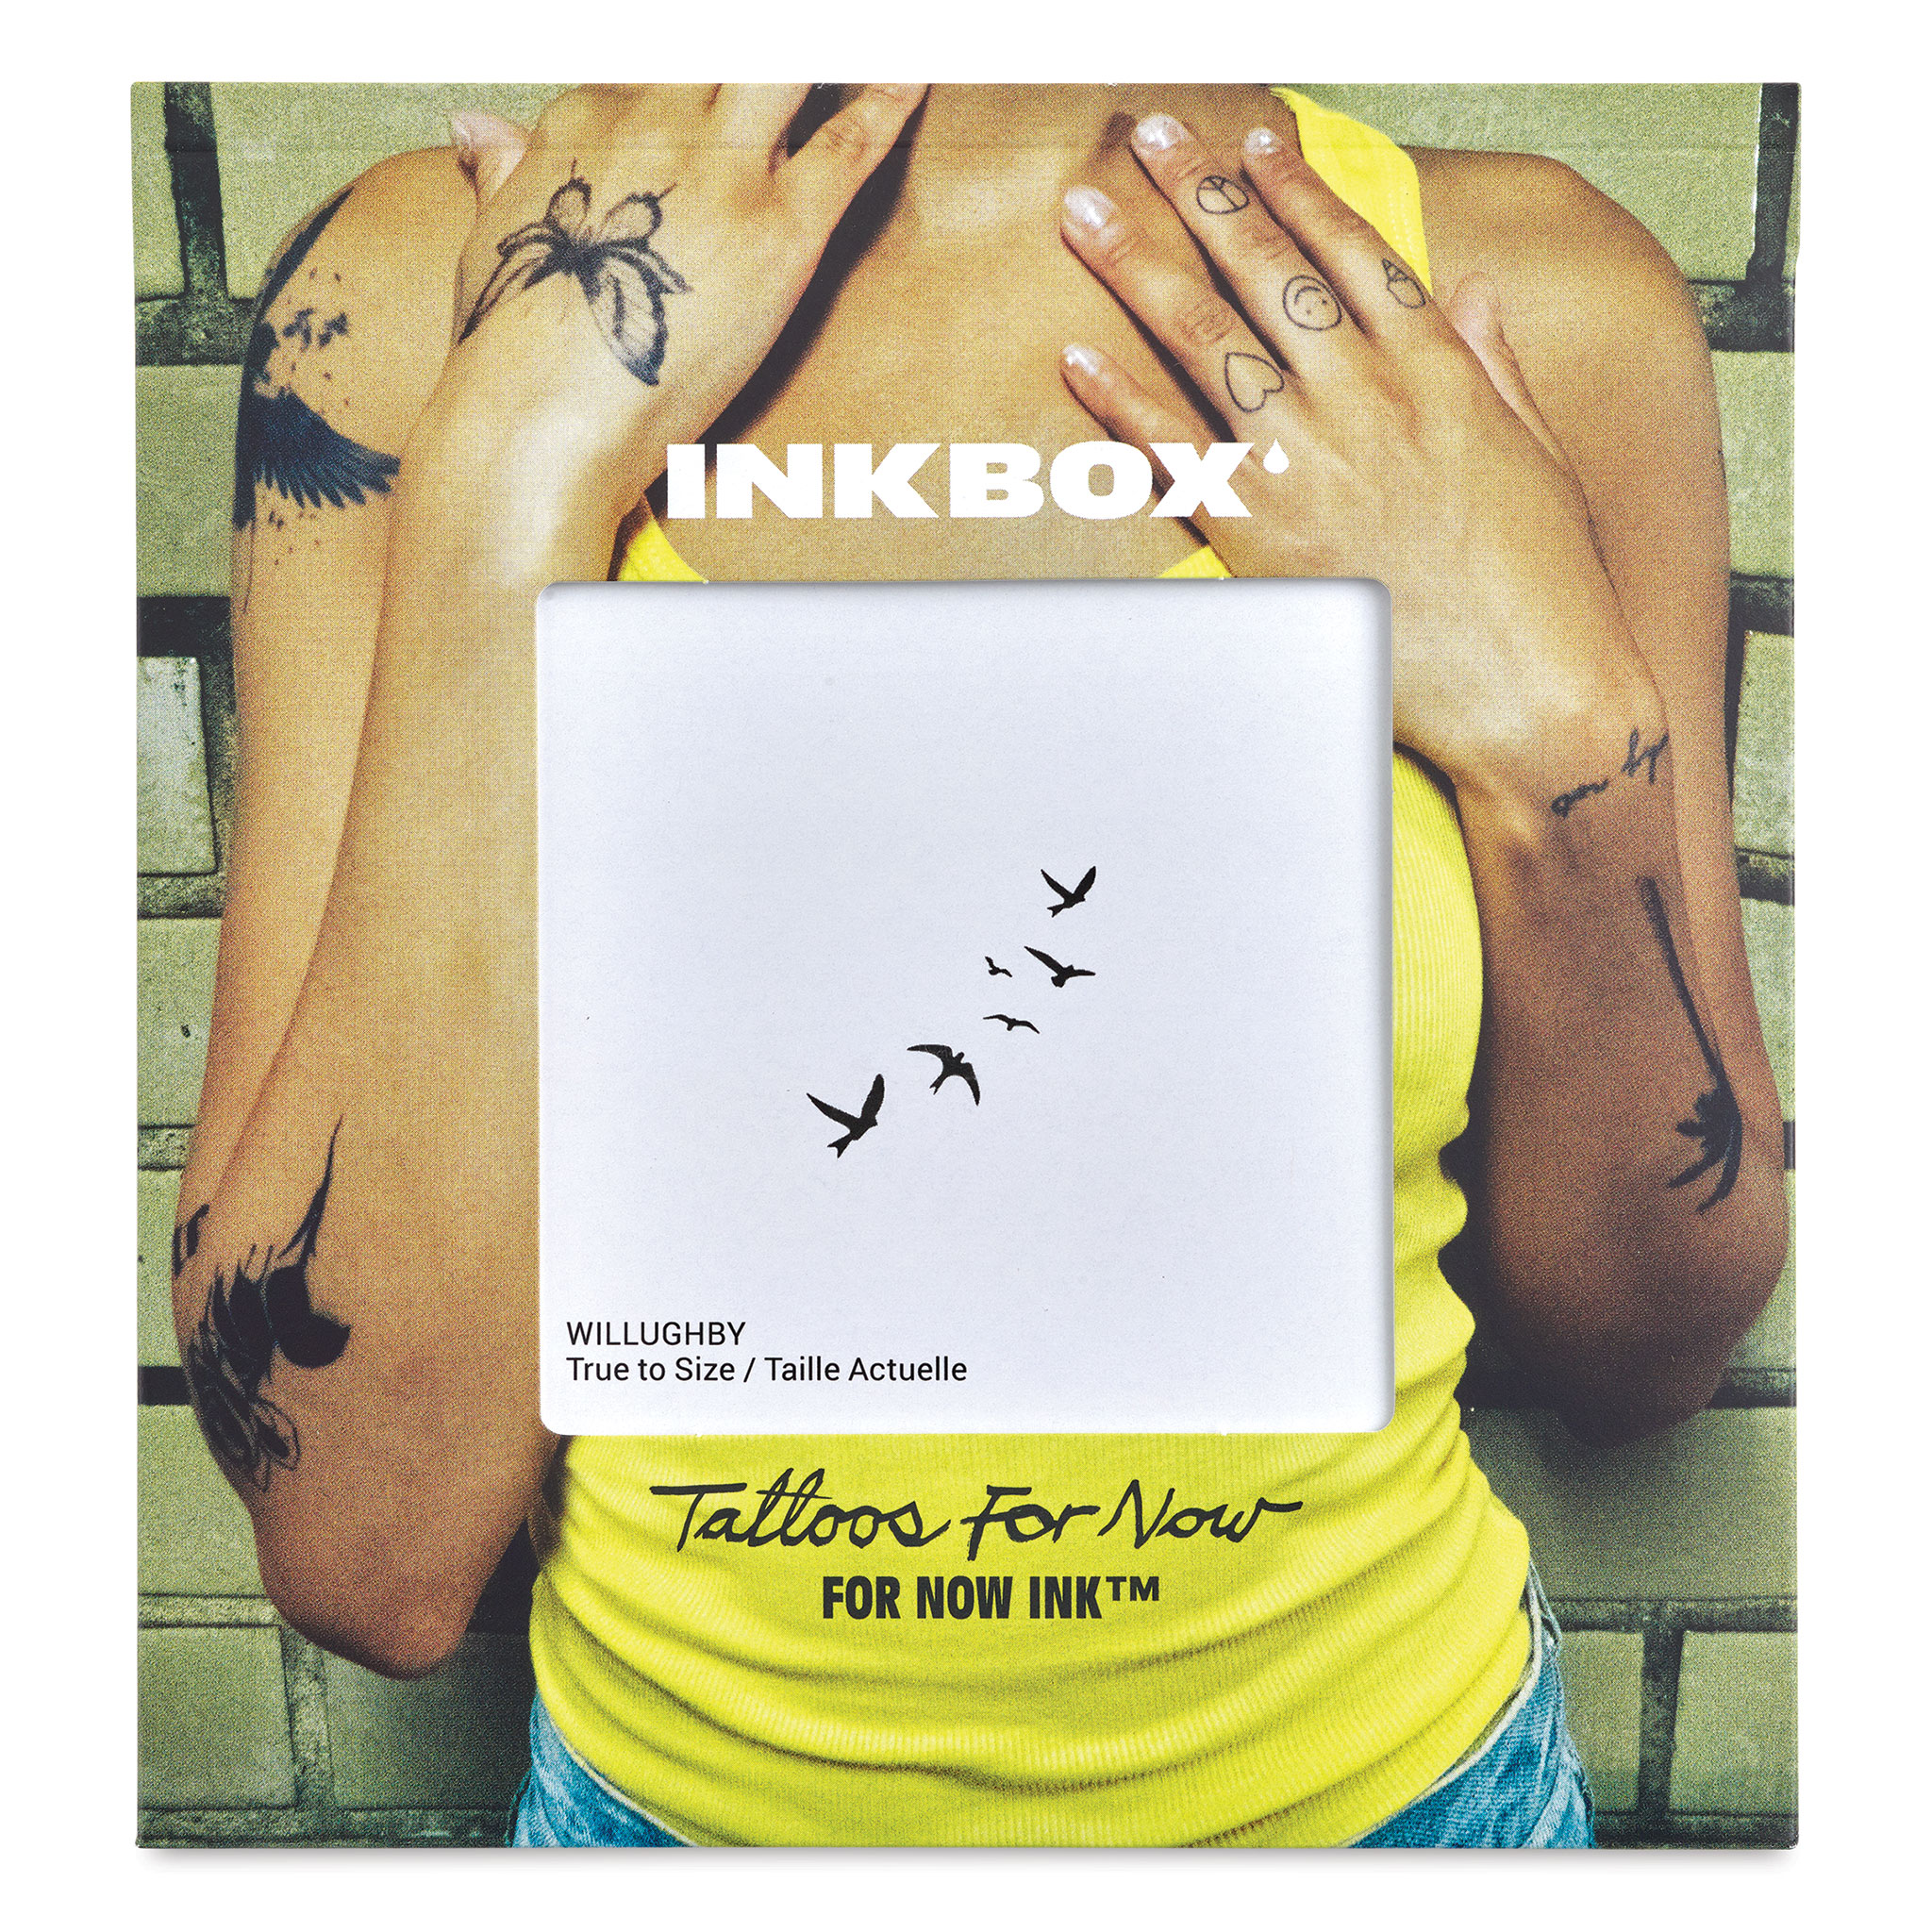 Inkbox Tattoos - Latest Emails, Sales & Deals